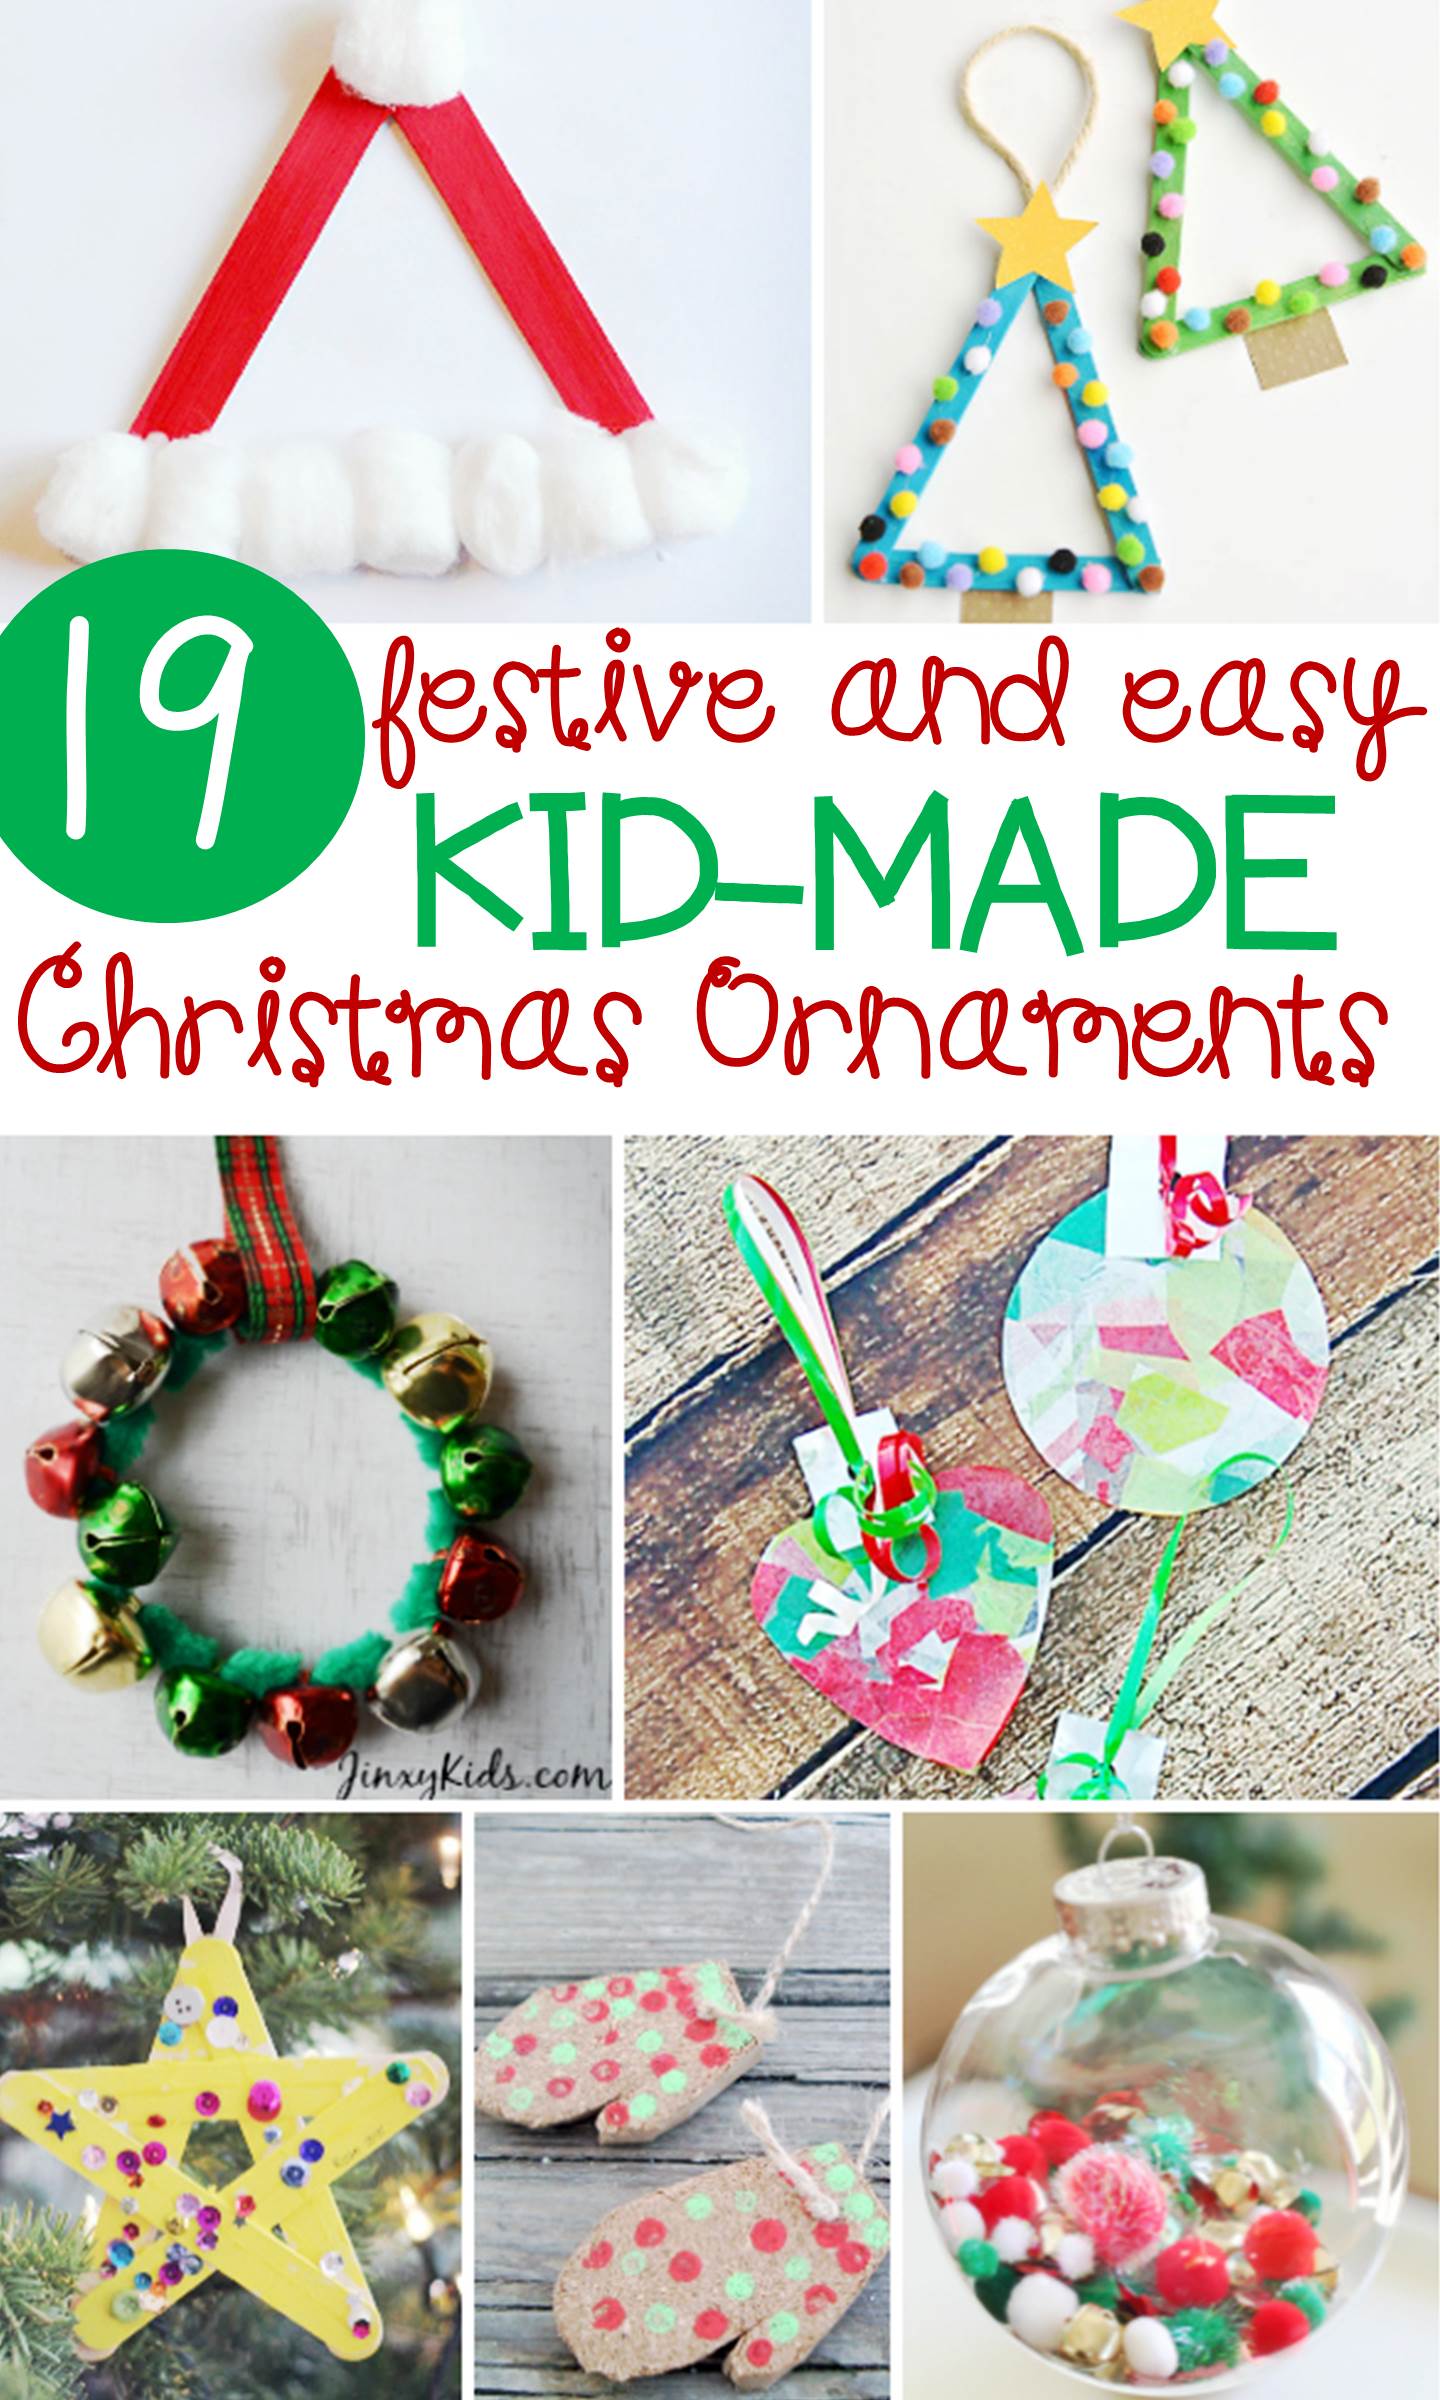 Festive and Simple Kids' Christmas Ornaments - The Kindergarten Connection